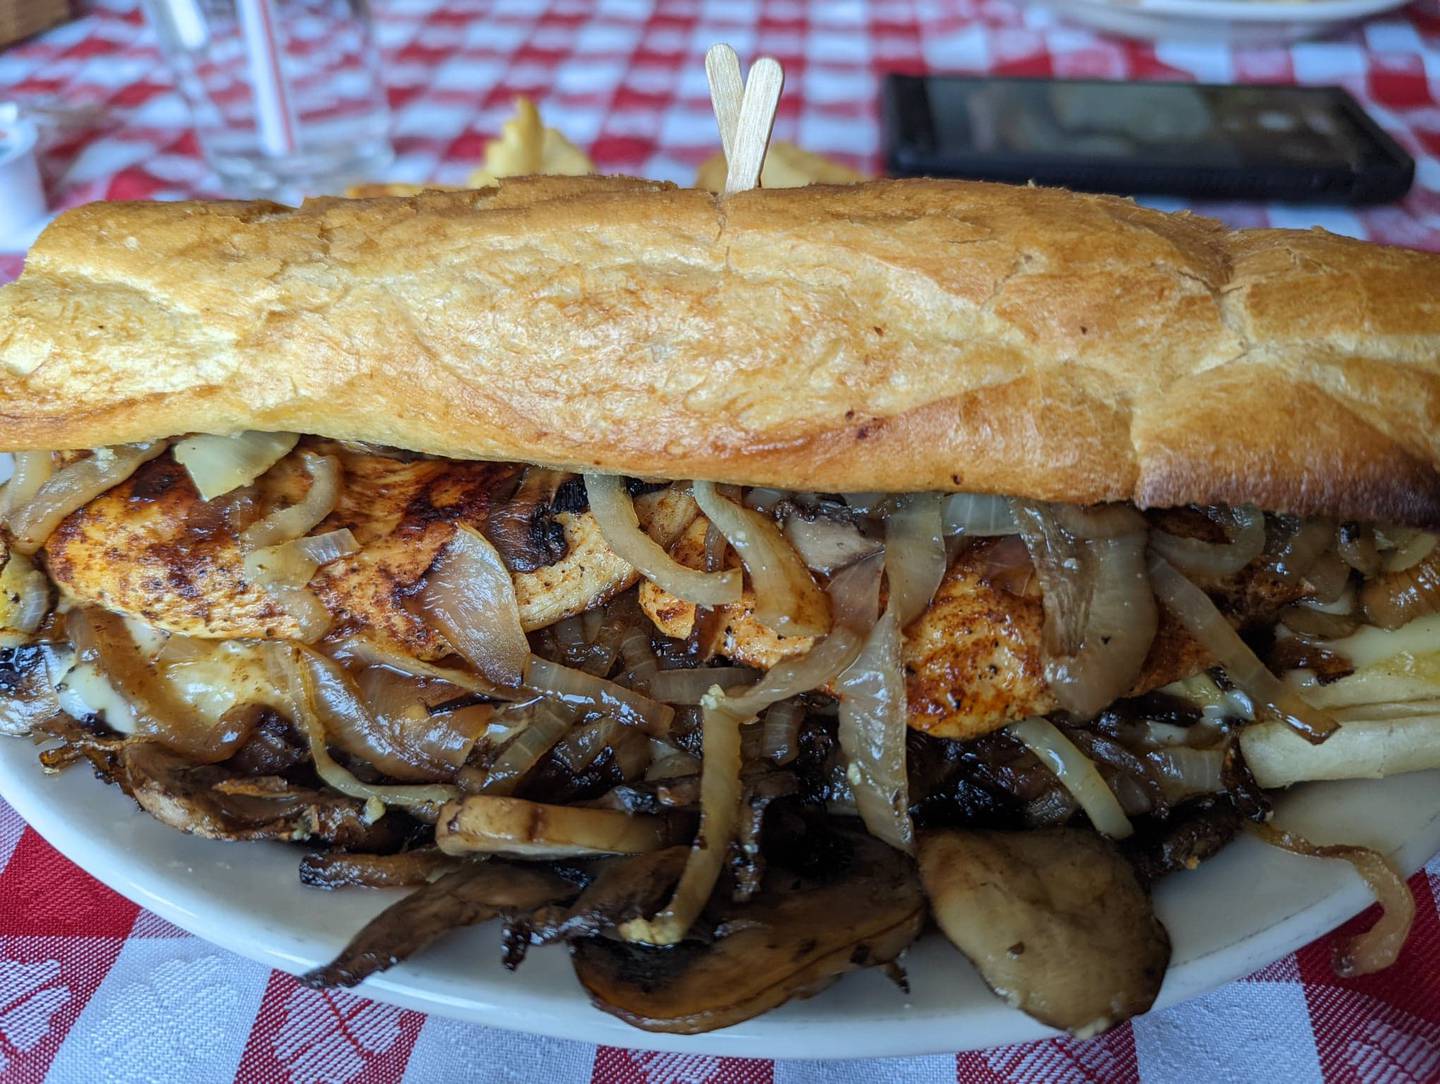 Merichka's in Crest Hill offers this grilled chicken twist on their classic cubed round steak.  The grilled chicken was seasoned to perfection and generously topped with grilled onions and mushrooms.